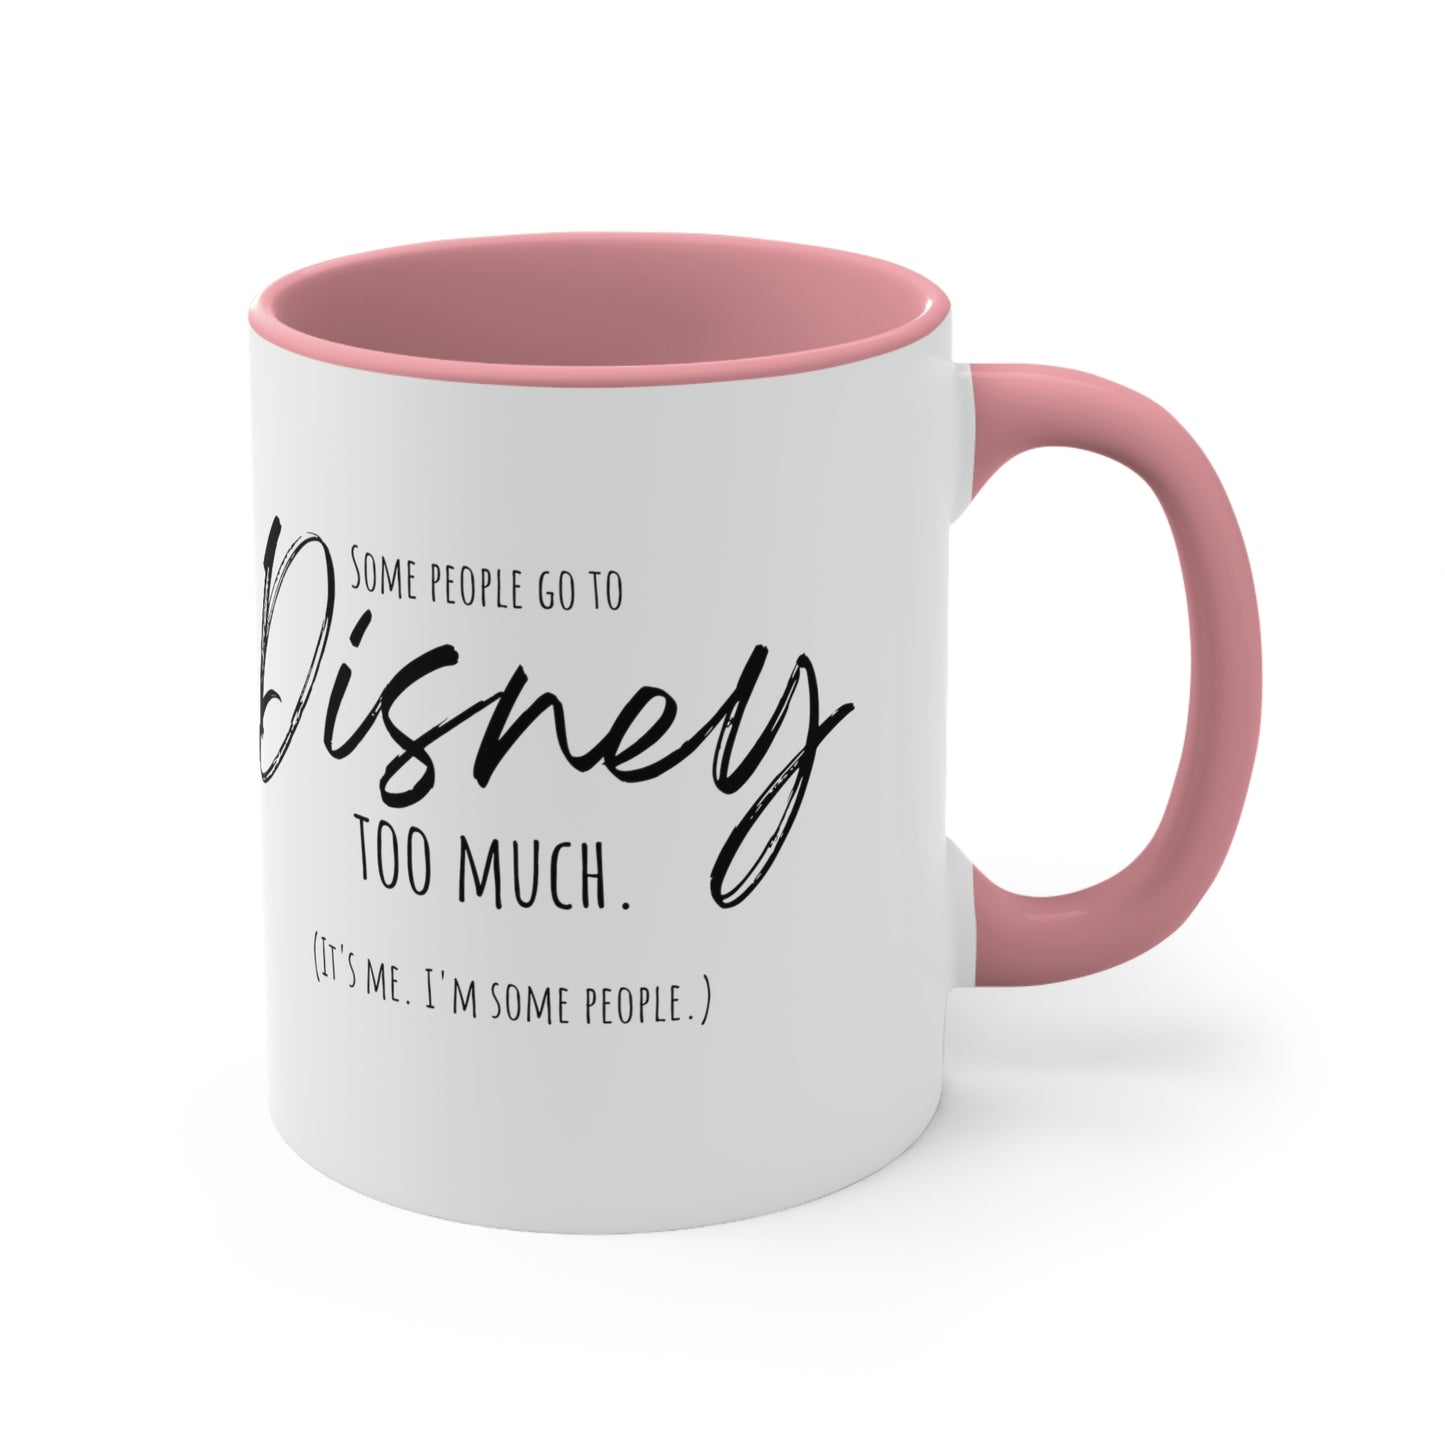 Some People Go To Disney Too Much - Accent Coffee Mug, 11oz